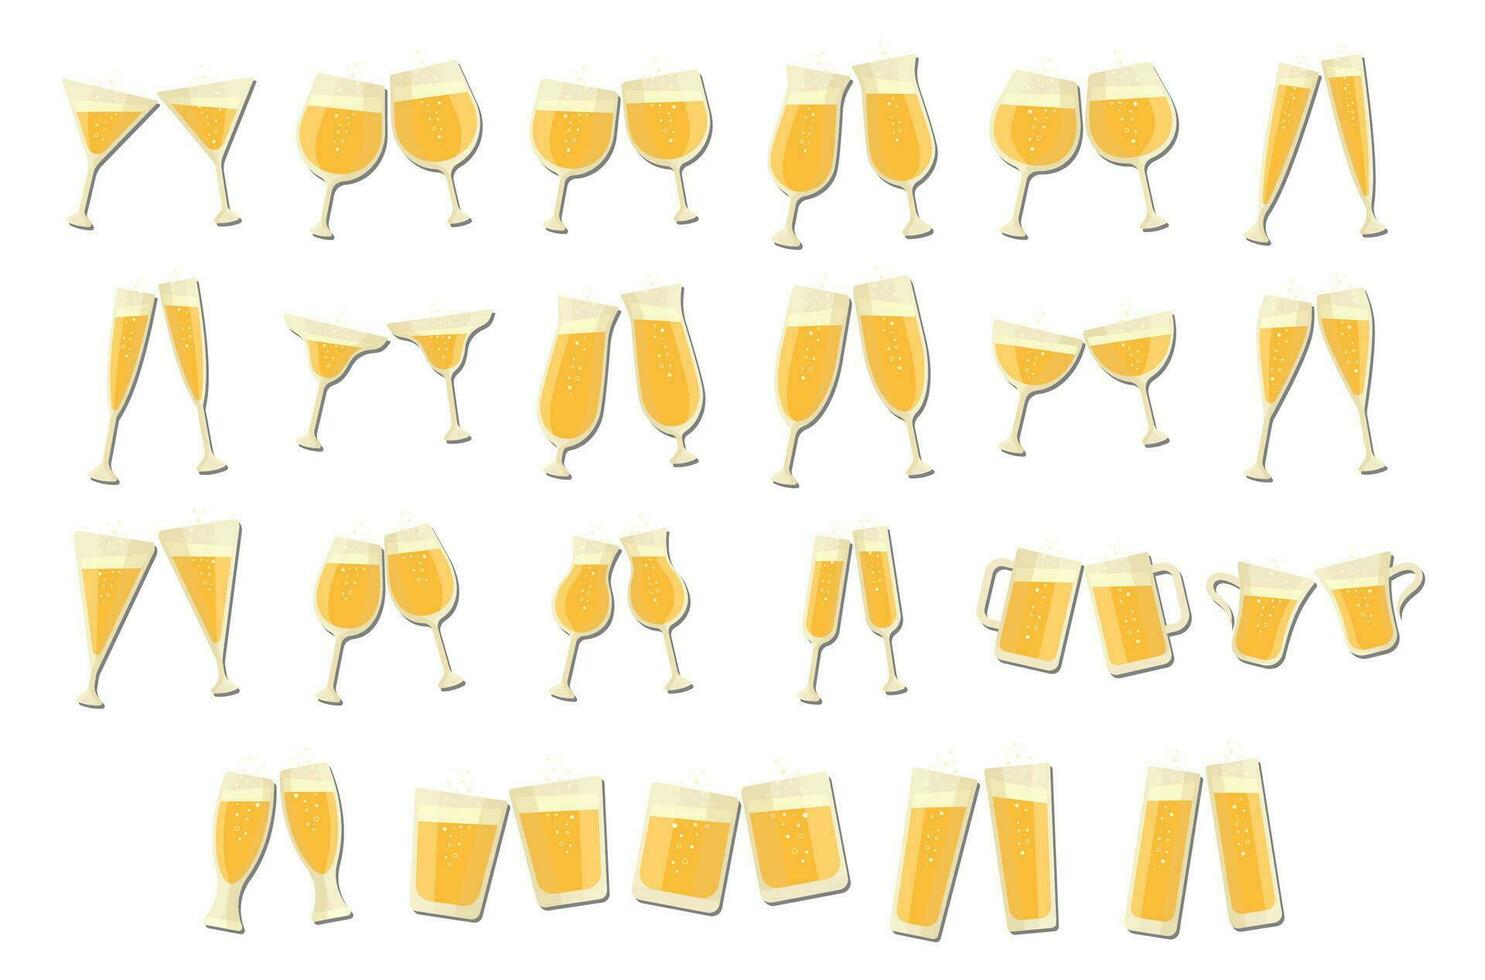 Sparkling Glasses Cheers Illustration vector